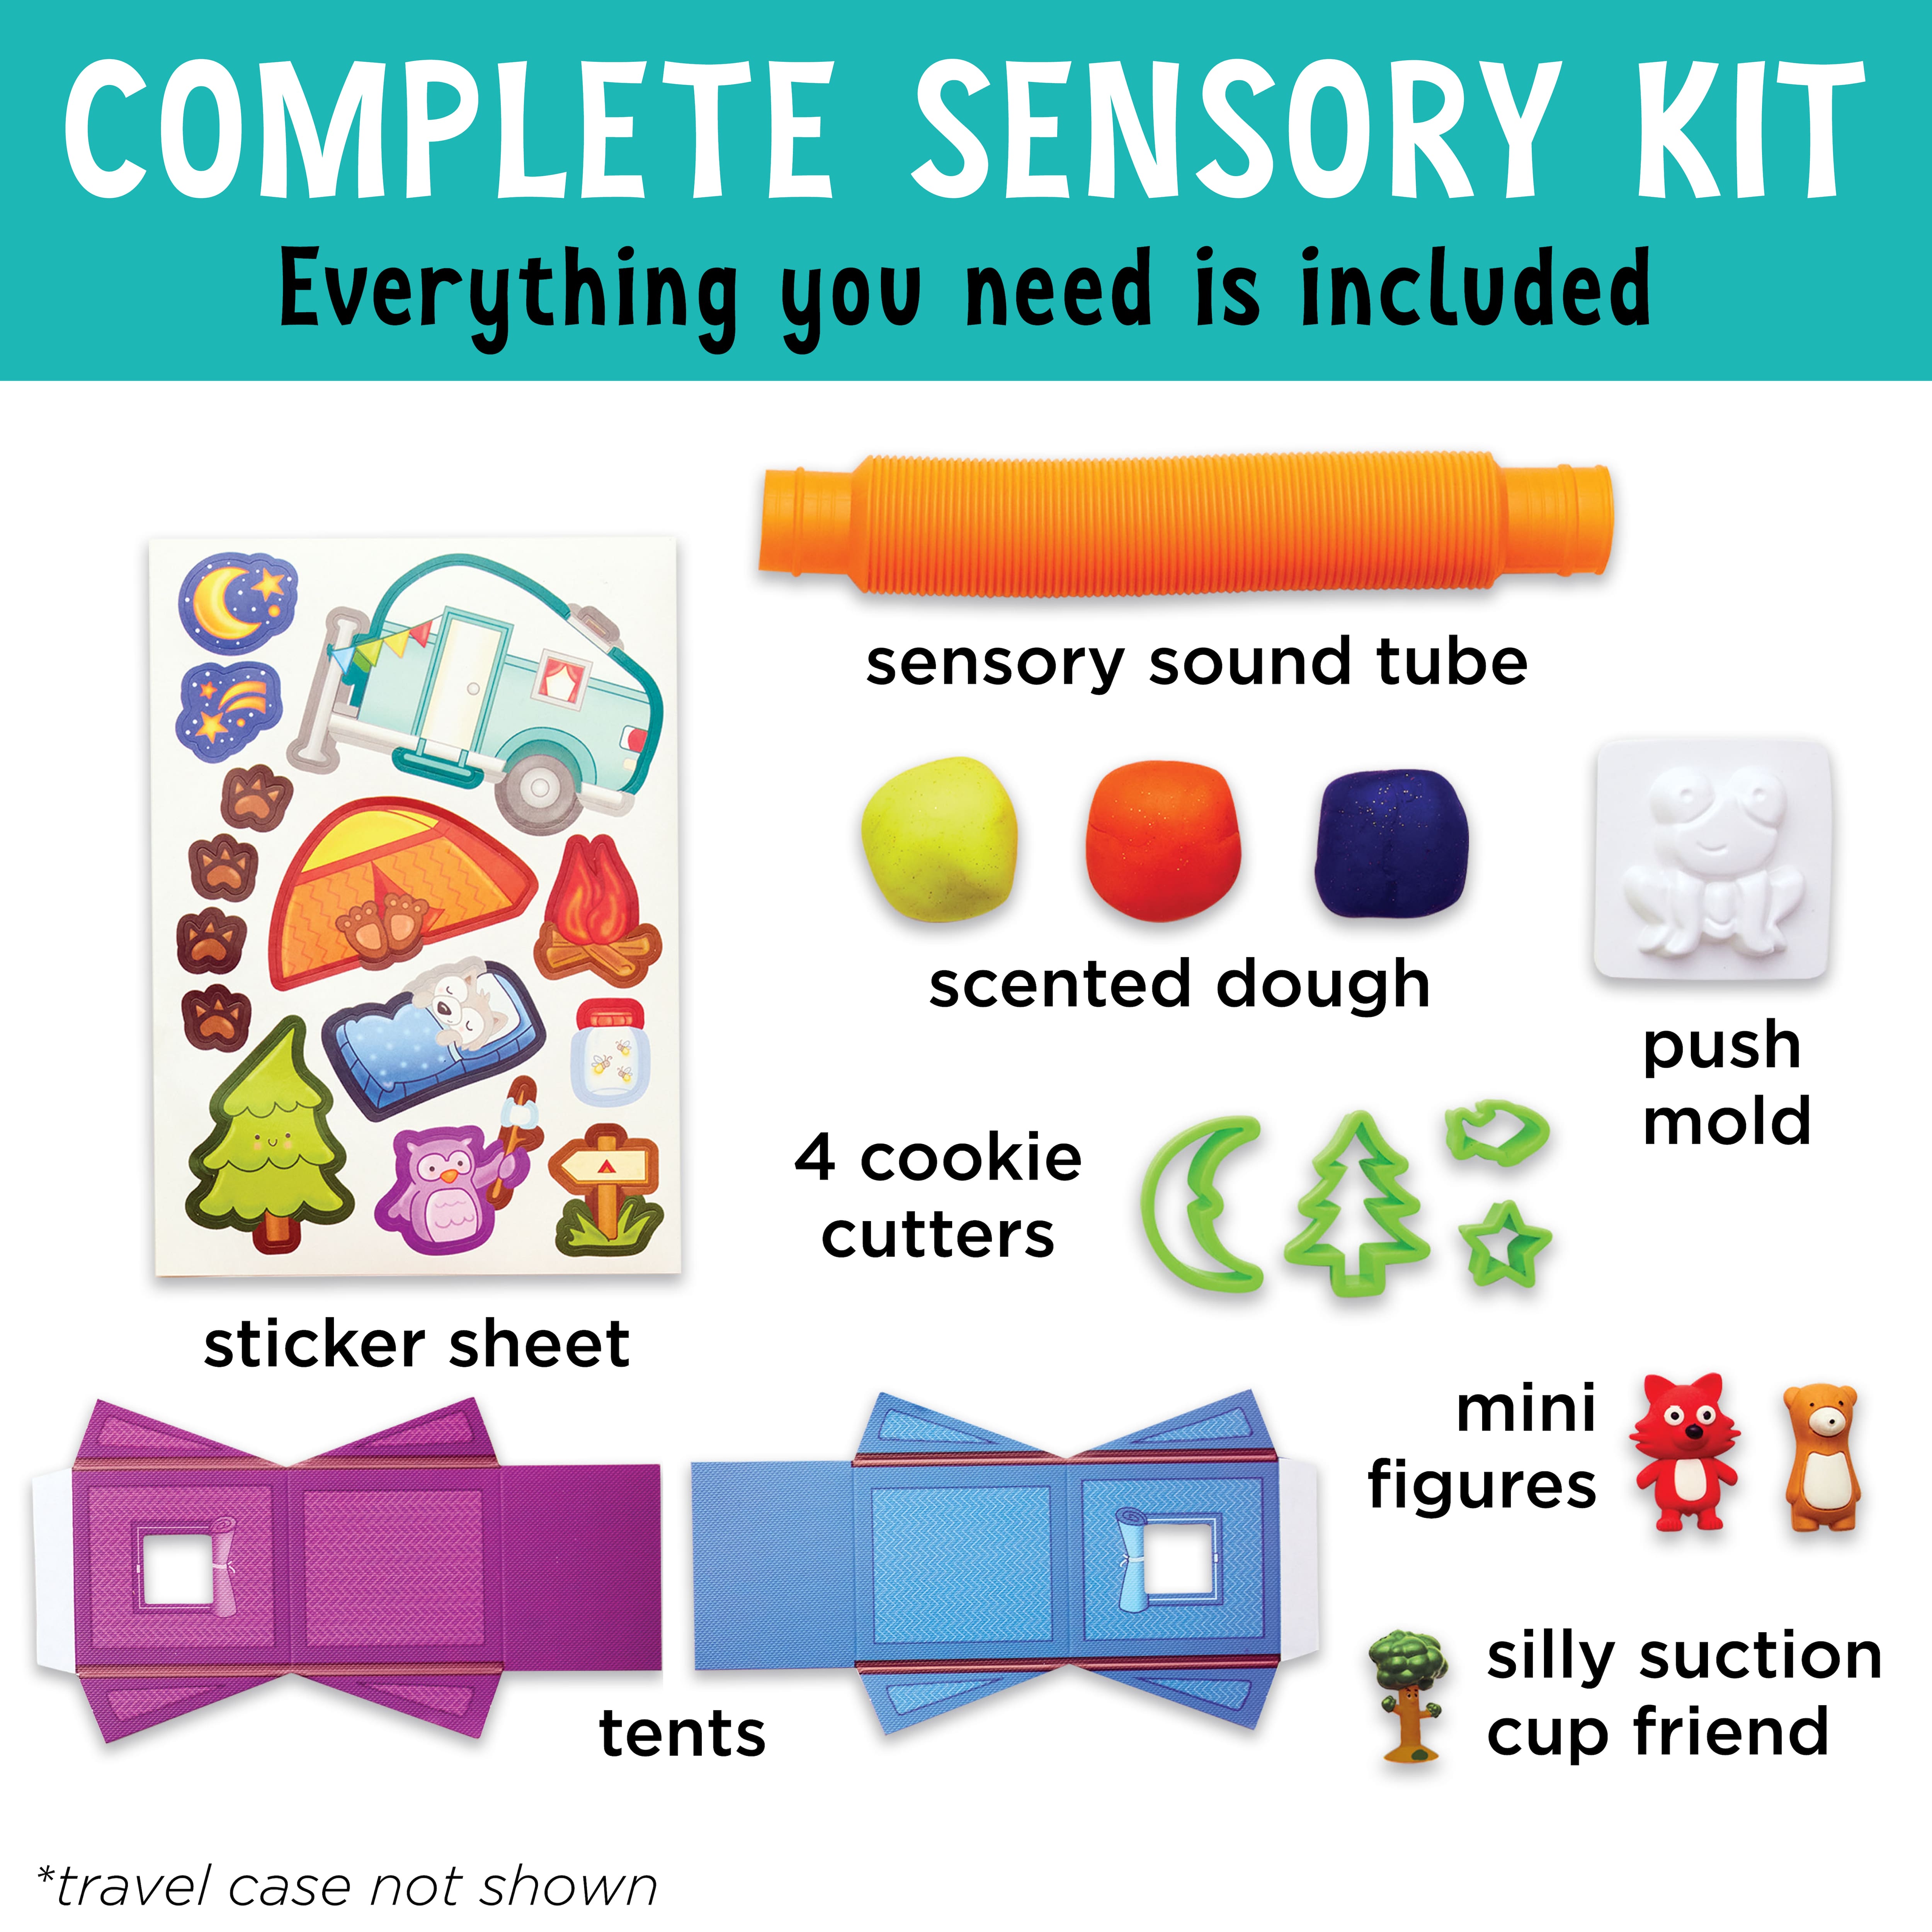 6 Pack: Creativity for Kids&#xAE; Sensory on the Go Camping Play Kit